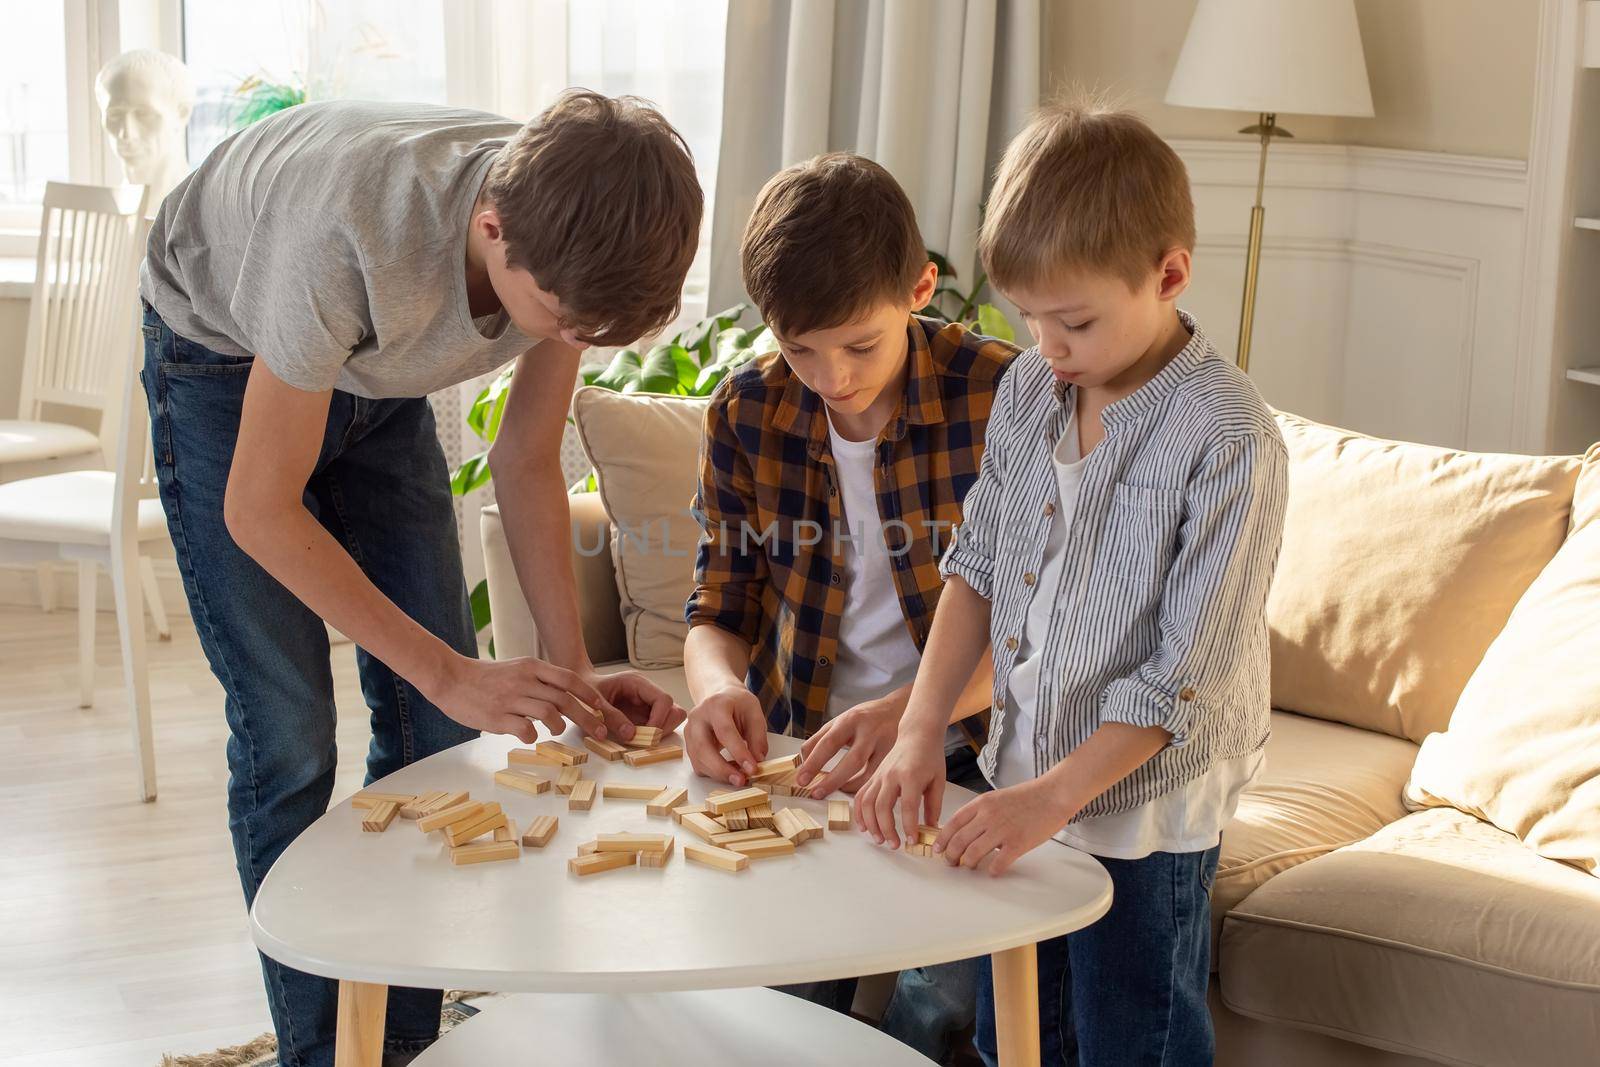 Three boys, in a sunny room, are enthusiastically playing a board game made of wooden rectangular blocks, pulling pieces out of the tower. Close-up